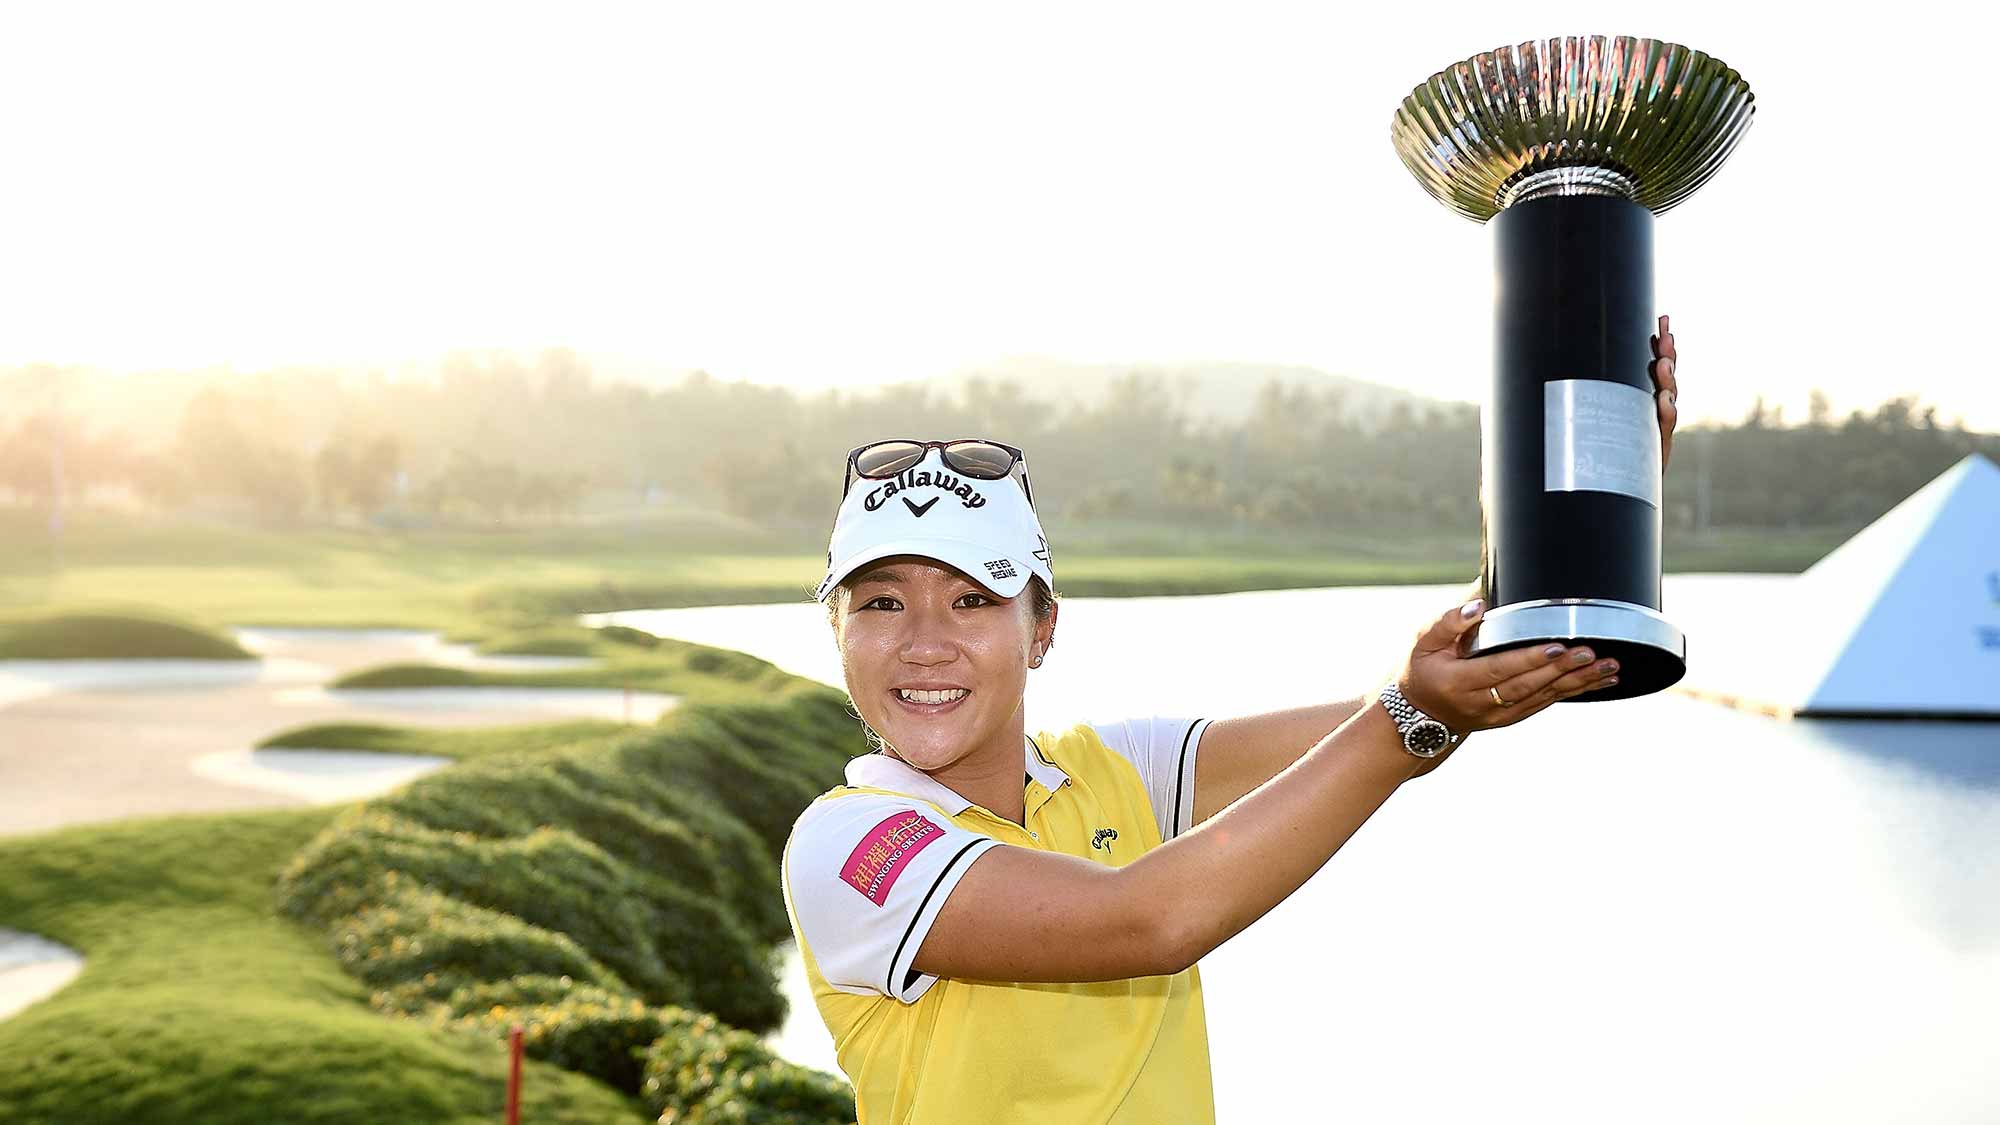 Lydia Ko poses with the trophy on the 18th green after winning 2015 Fubon LPGA Taiwan Championship on October 25, 2015 in Miramar Resort & Country Club